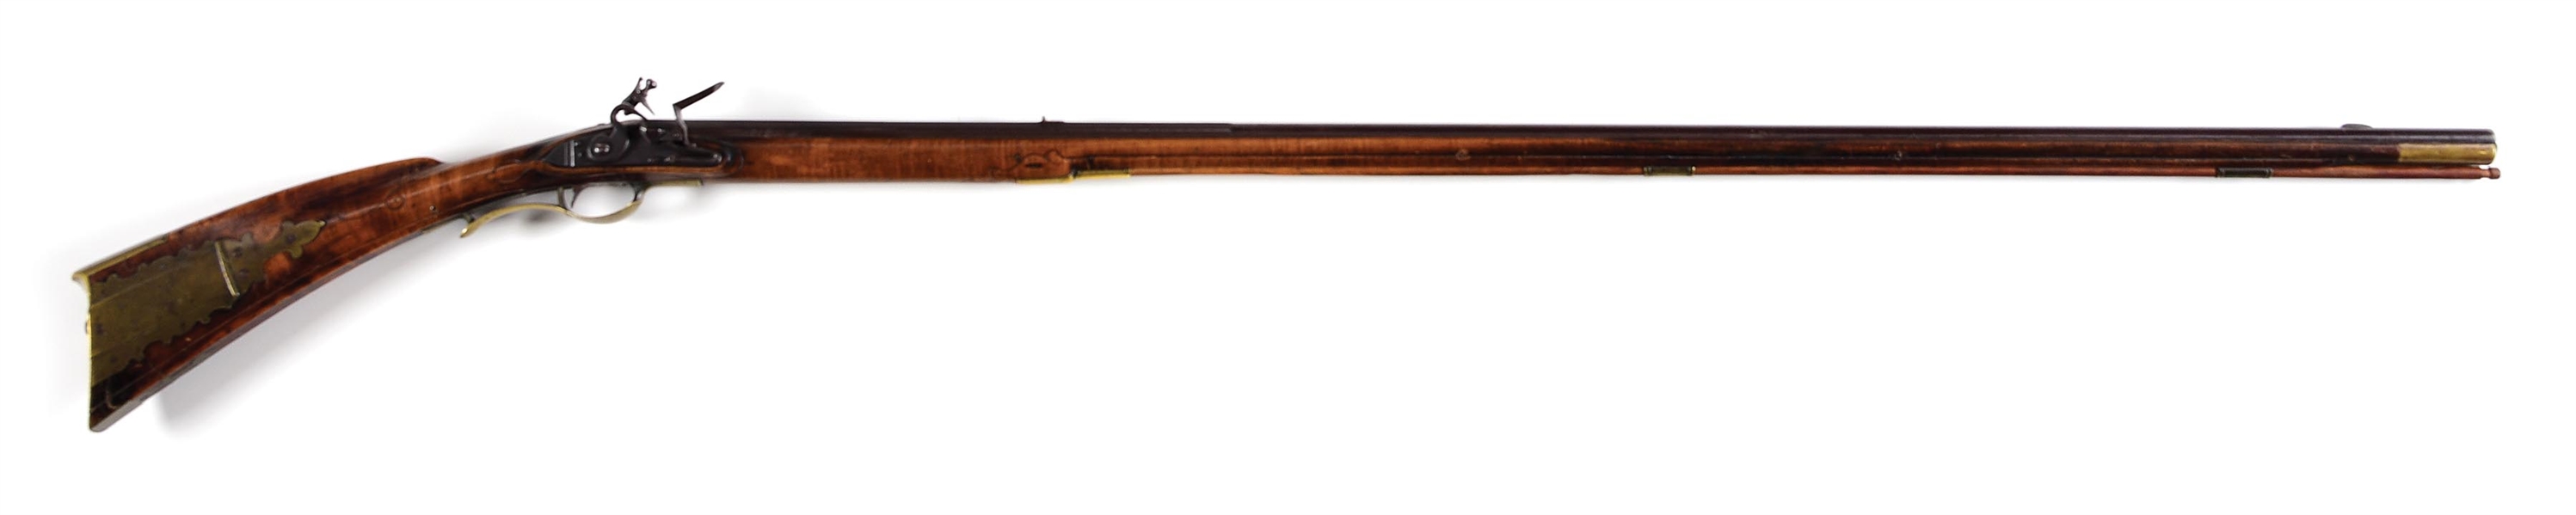 (A) RELEIF CARVED KENTUCKY FLINTLOCK RIFLE ATTRIBUTED TO STOFFILL SMITH.